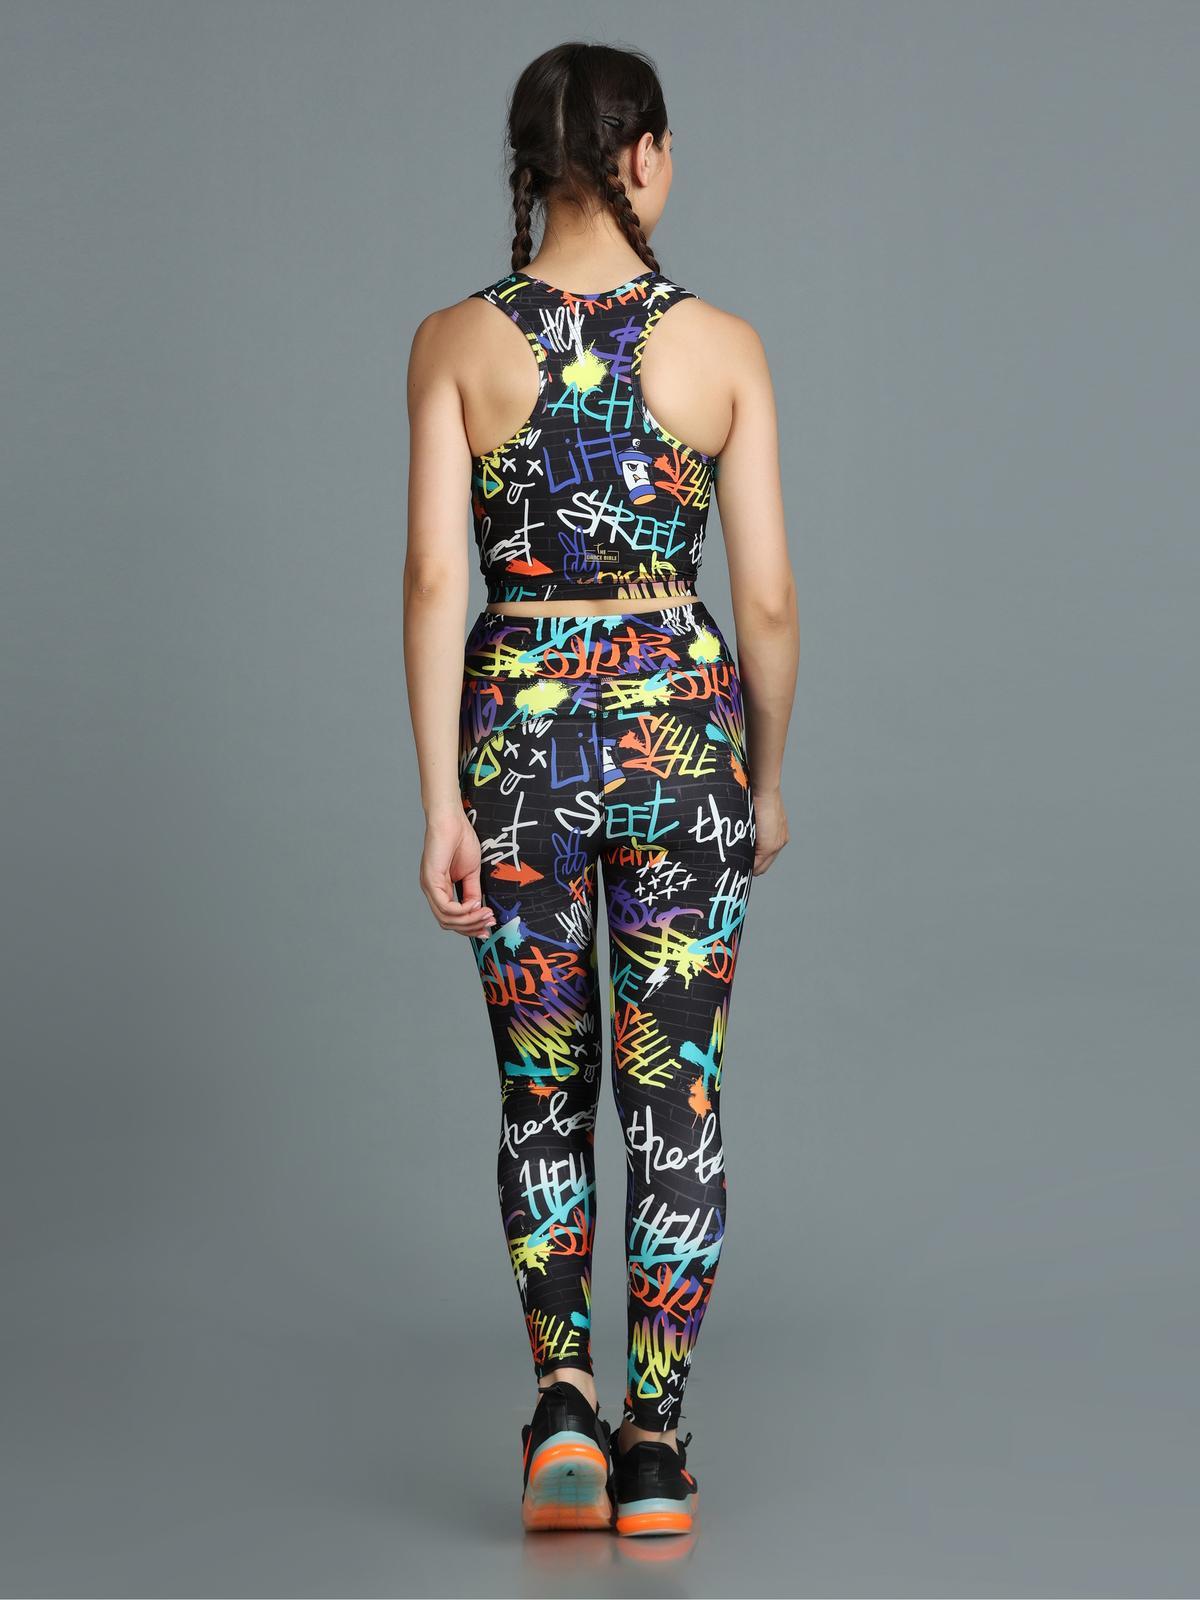 Stylish Printed Co-ord Activewear Leggings and Padded Sports Top Set - Hannah